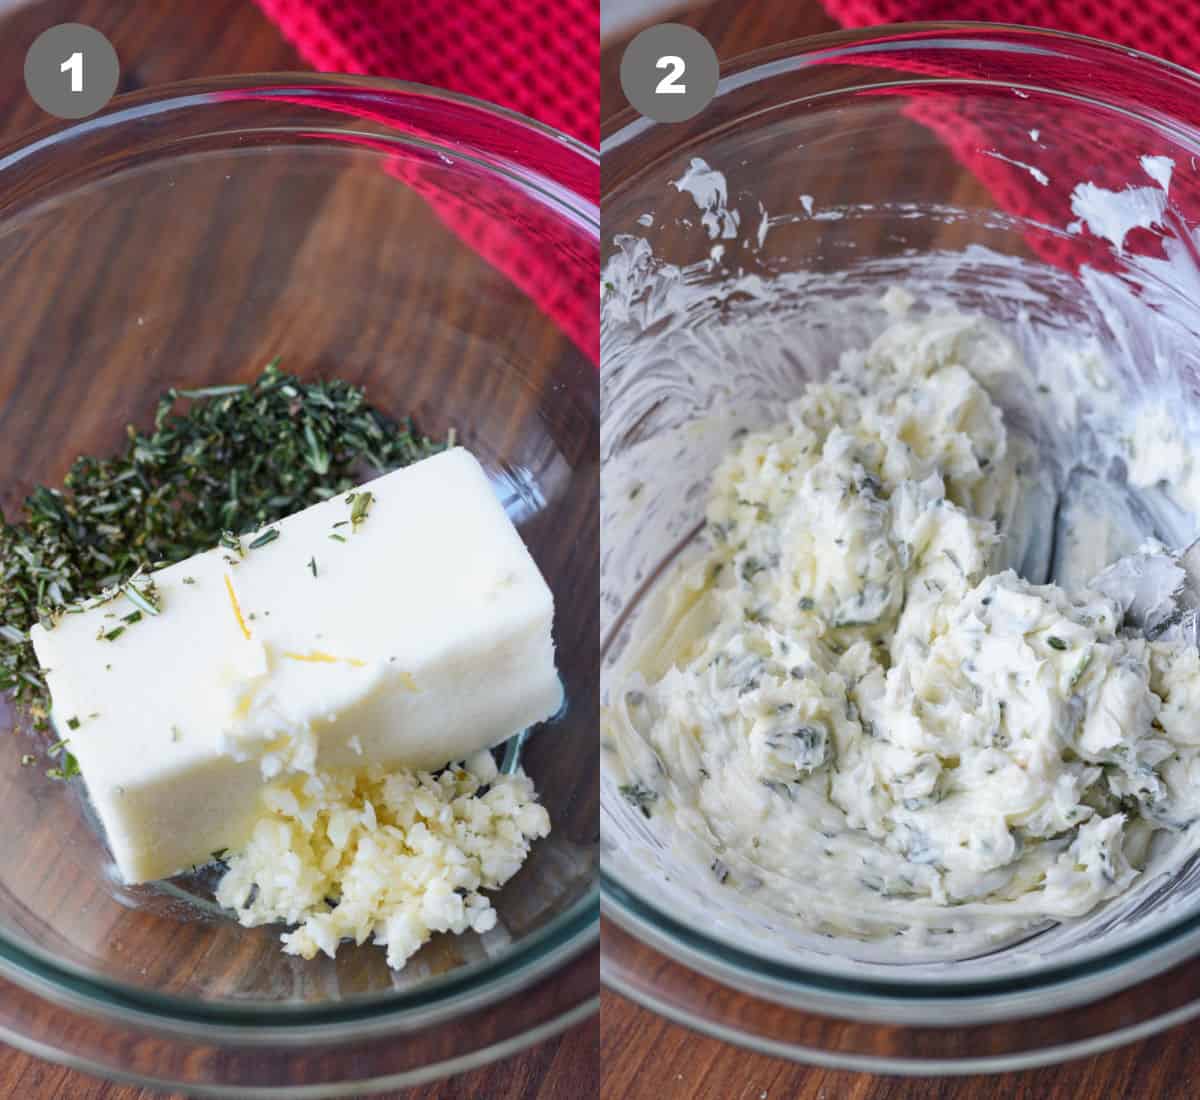 Garlic herb butter ingredients mixed together in a bowl.